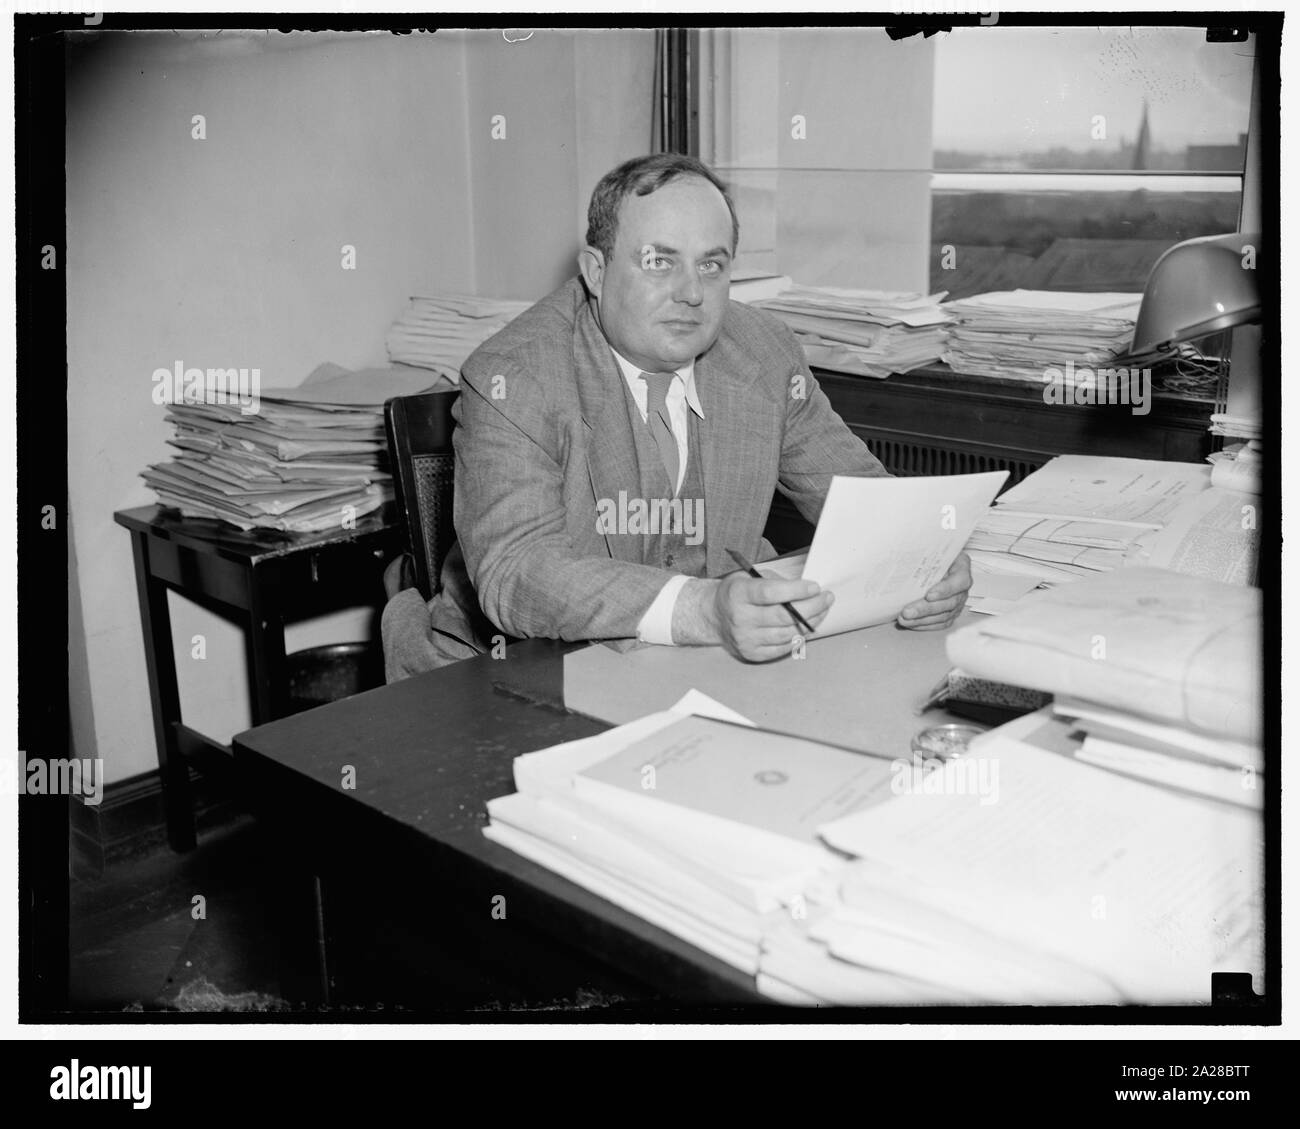 Promoted. Washington, D.C., June 10. C.F. Stam has been named Chief of Staff of the Joint Congressional Committee ... Internal Revenue Taxation to succeed Lovell H. ...rker, who has resigned to enter private practice. ...rving with the committee since 1927; Stam has been ... councel until the promotion, 6/10/38 Stock Photo